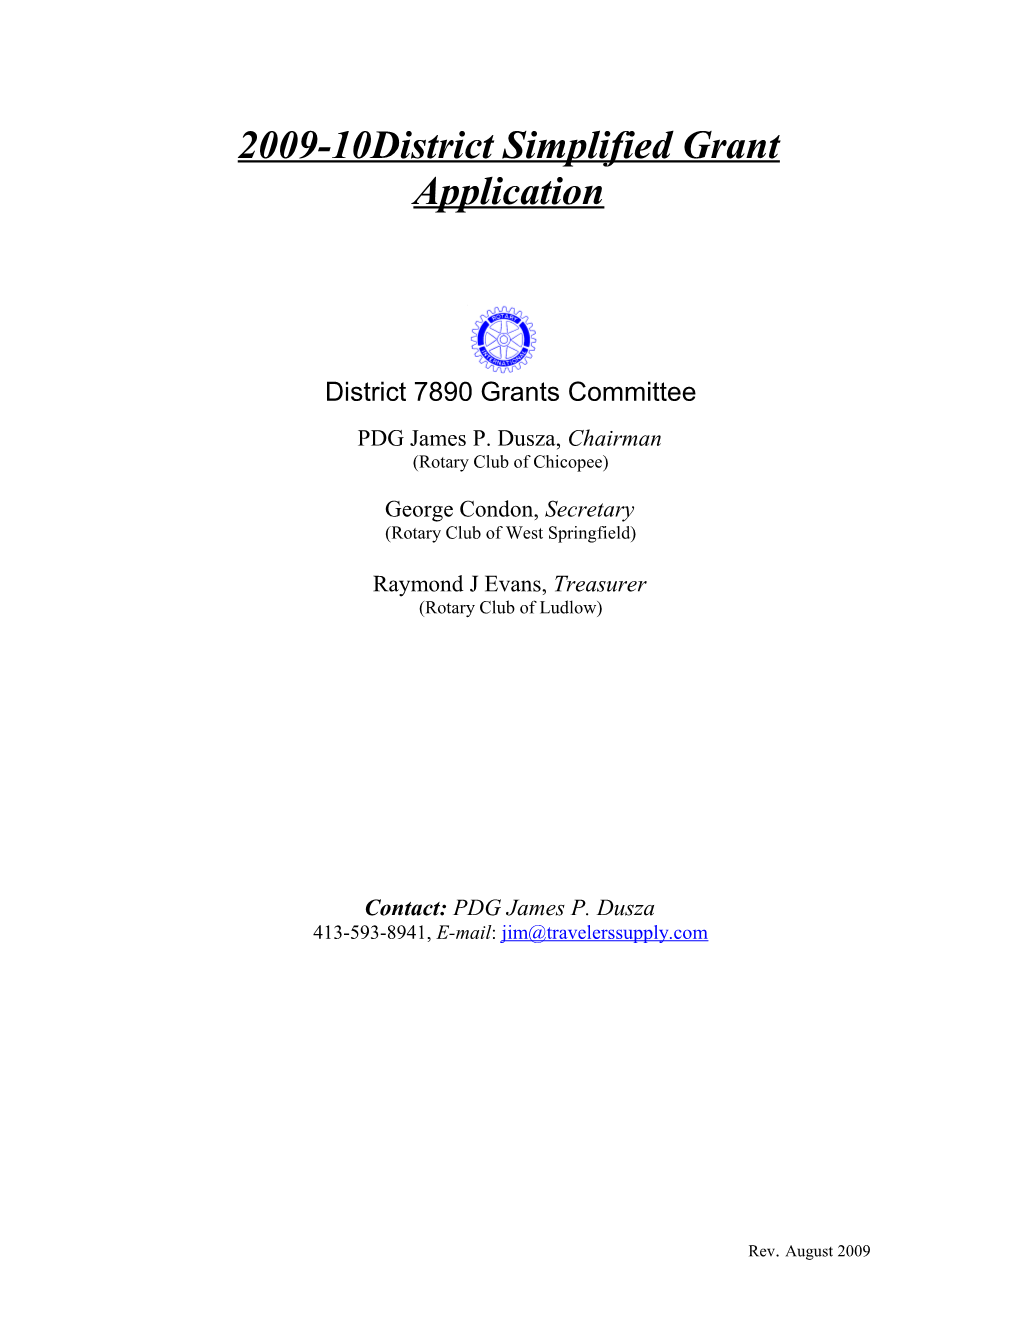 2009-10District Simplified Grant Application